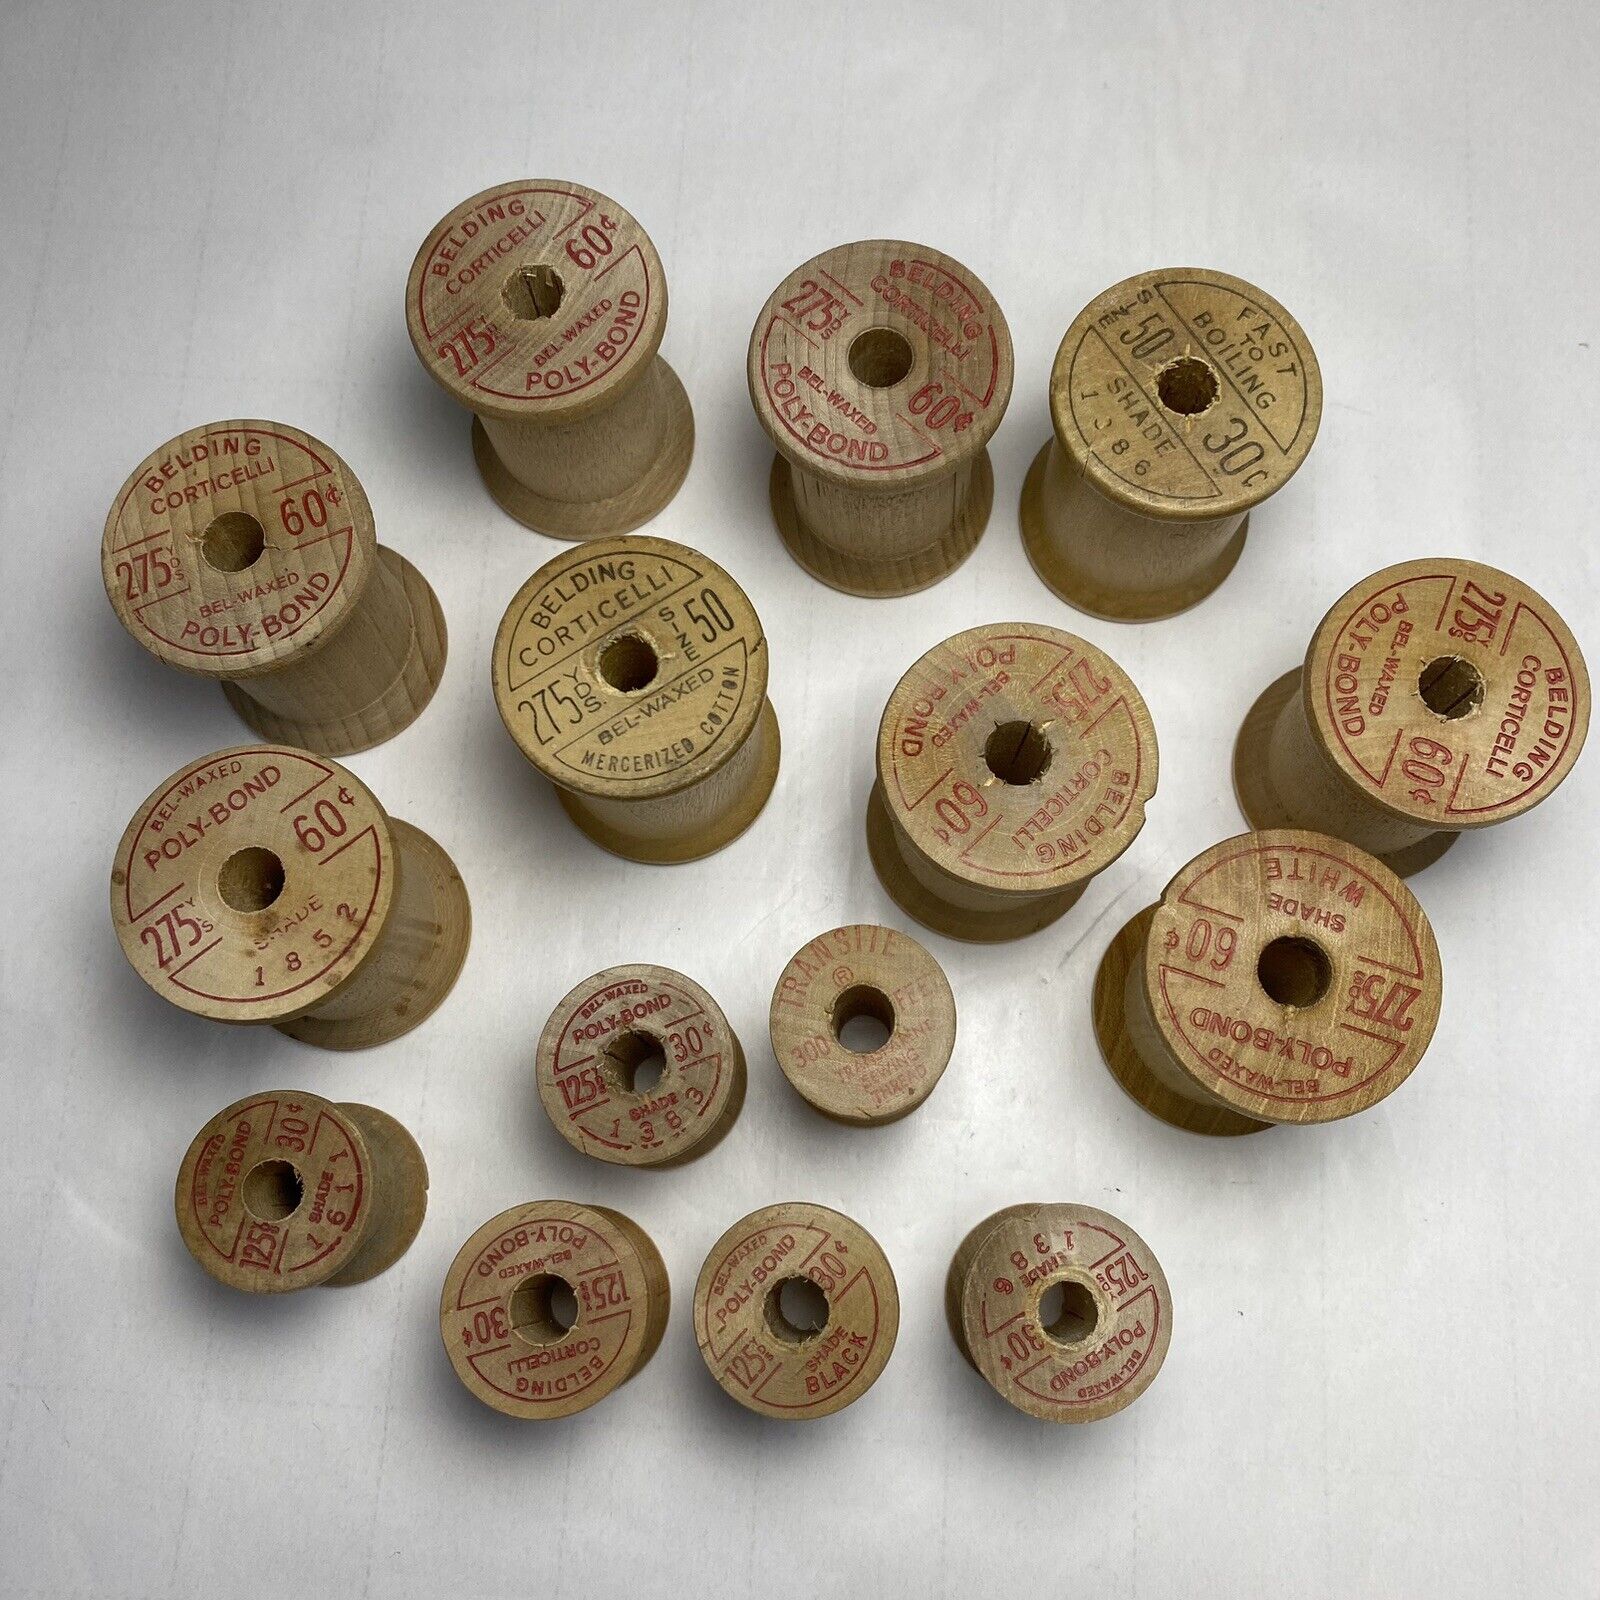 Lot 15 Belding Corticelli EMPTY Wooden Thread Spools Vintage For Crafting